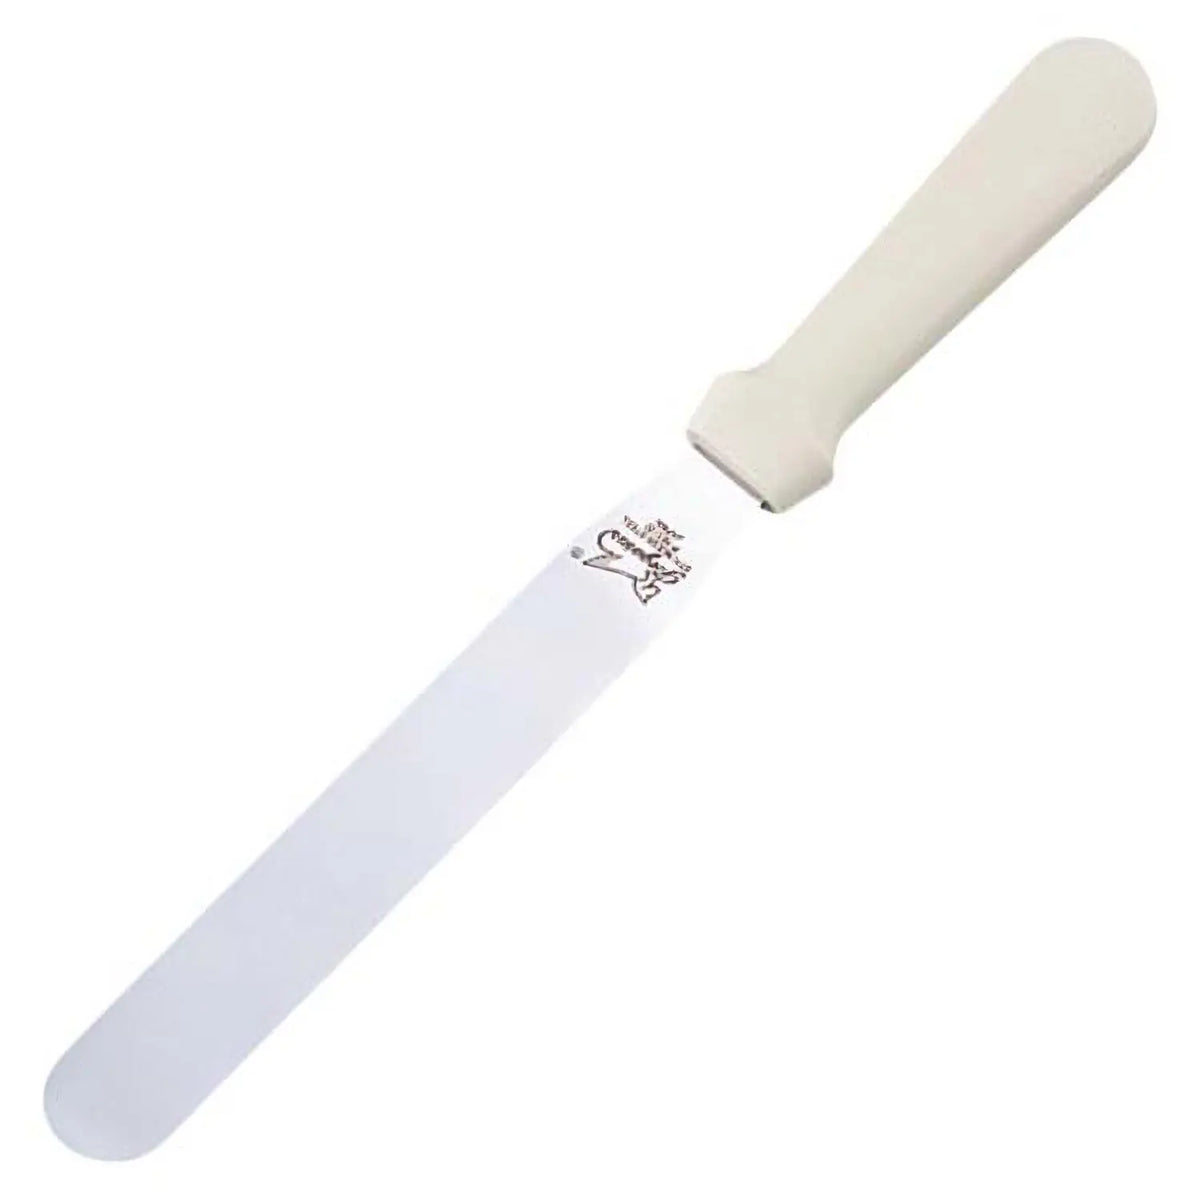 EBM Stainless Steel Icing Spatula